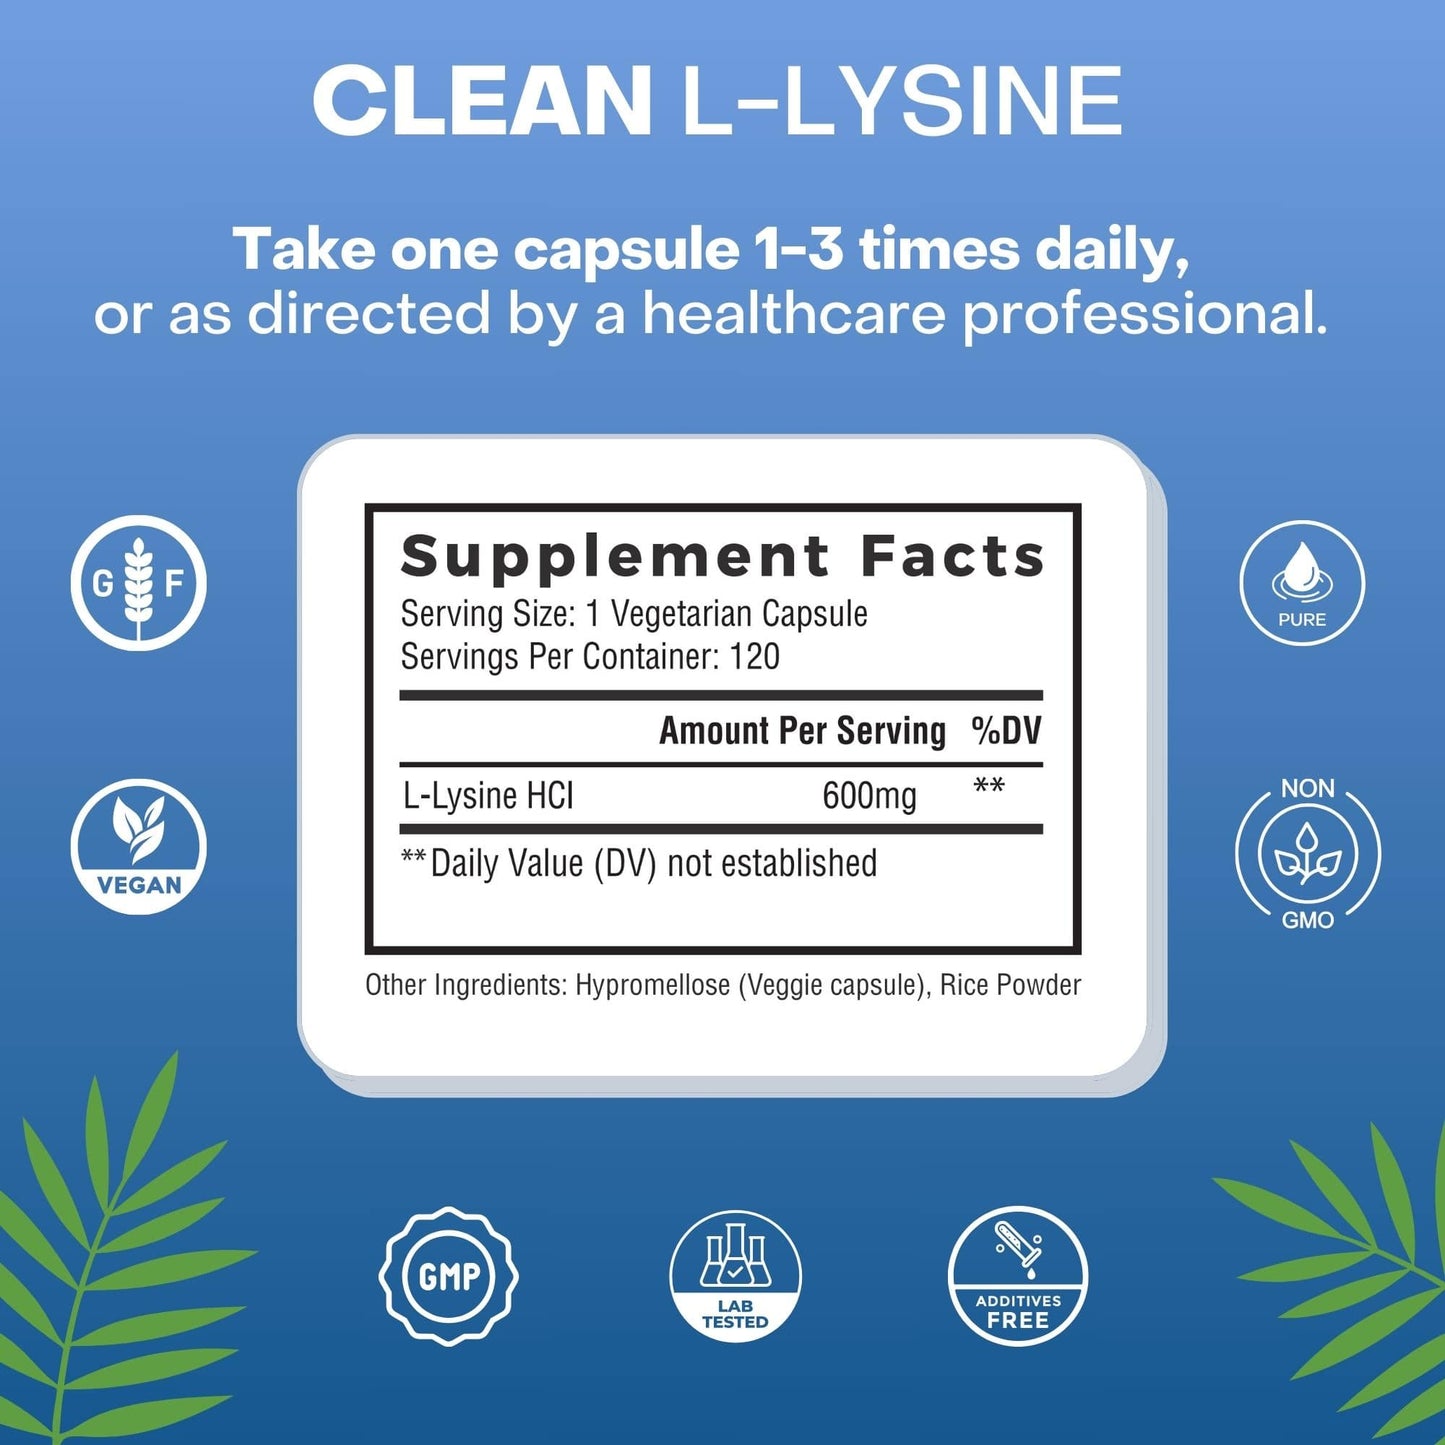 
                  
                    Supplement facts label for Palmara Health's L-Lysine, showing the recommended dosage, vegan ingredients, and the inclusion of monolaurin for enhanced wellness.
                  
                